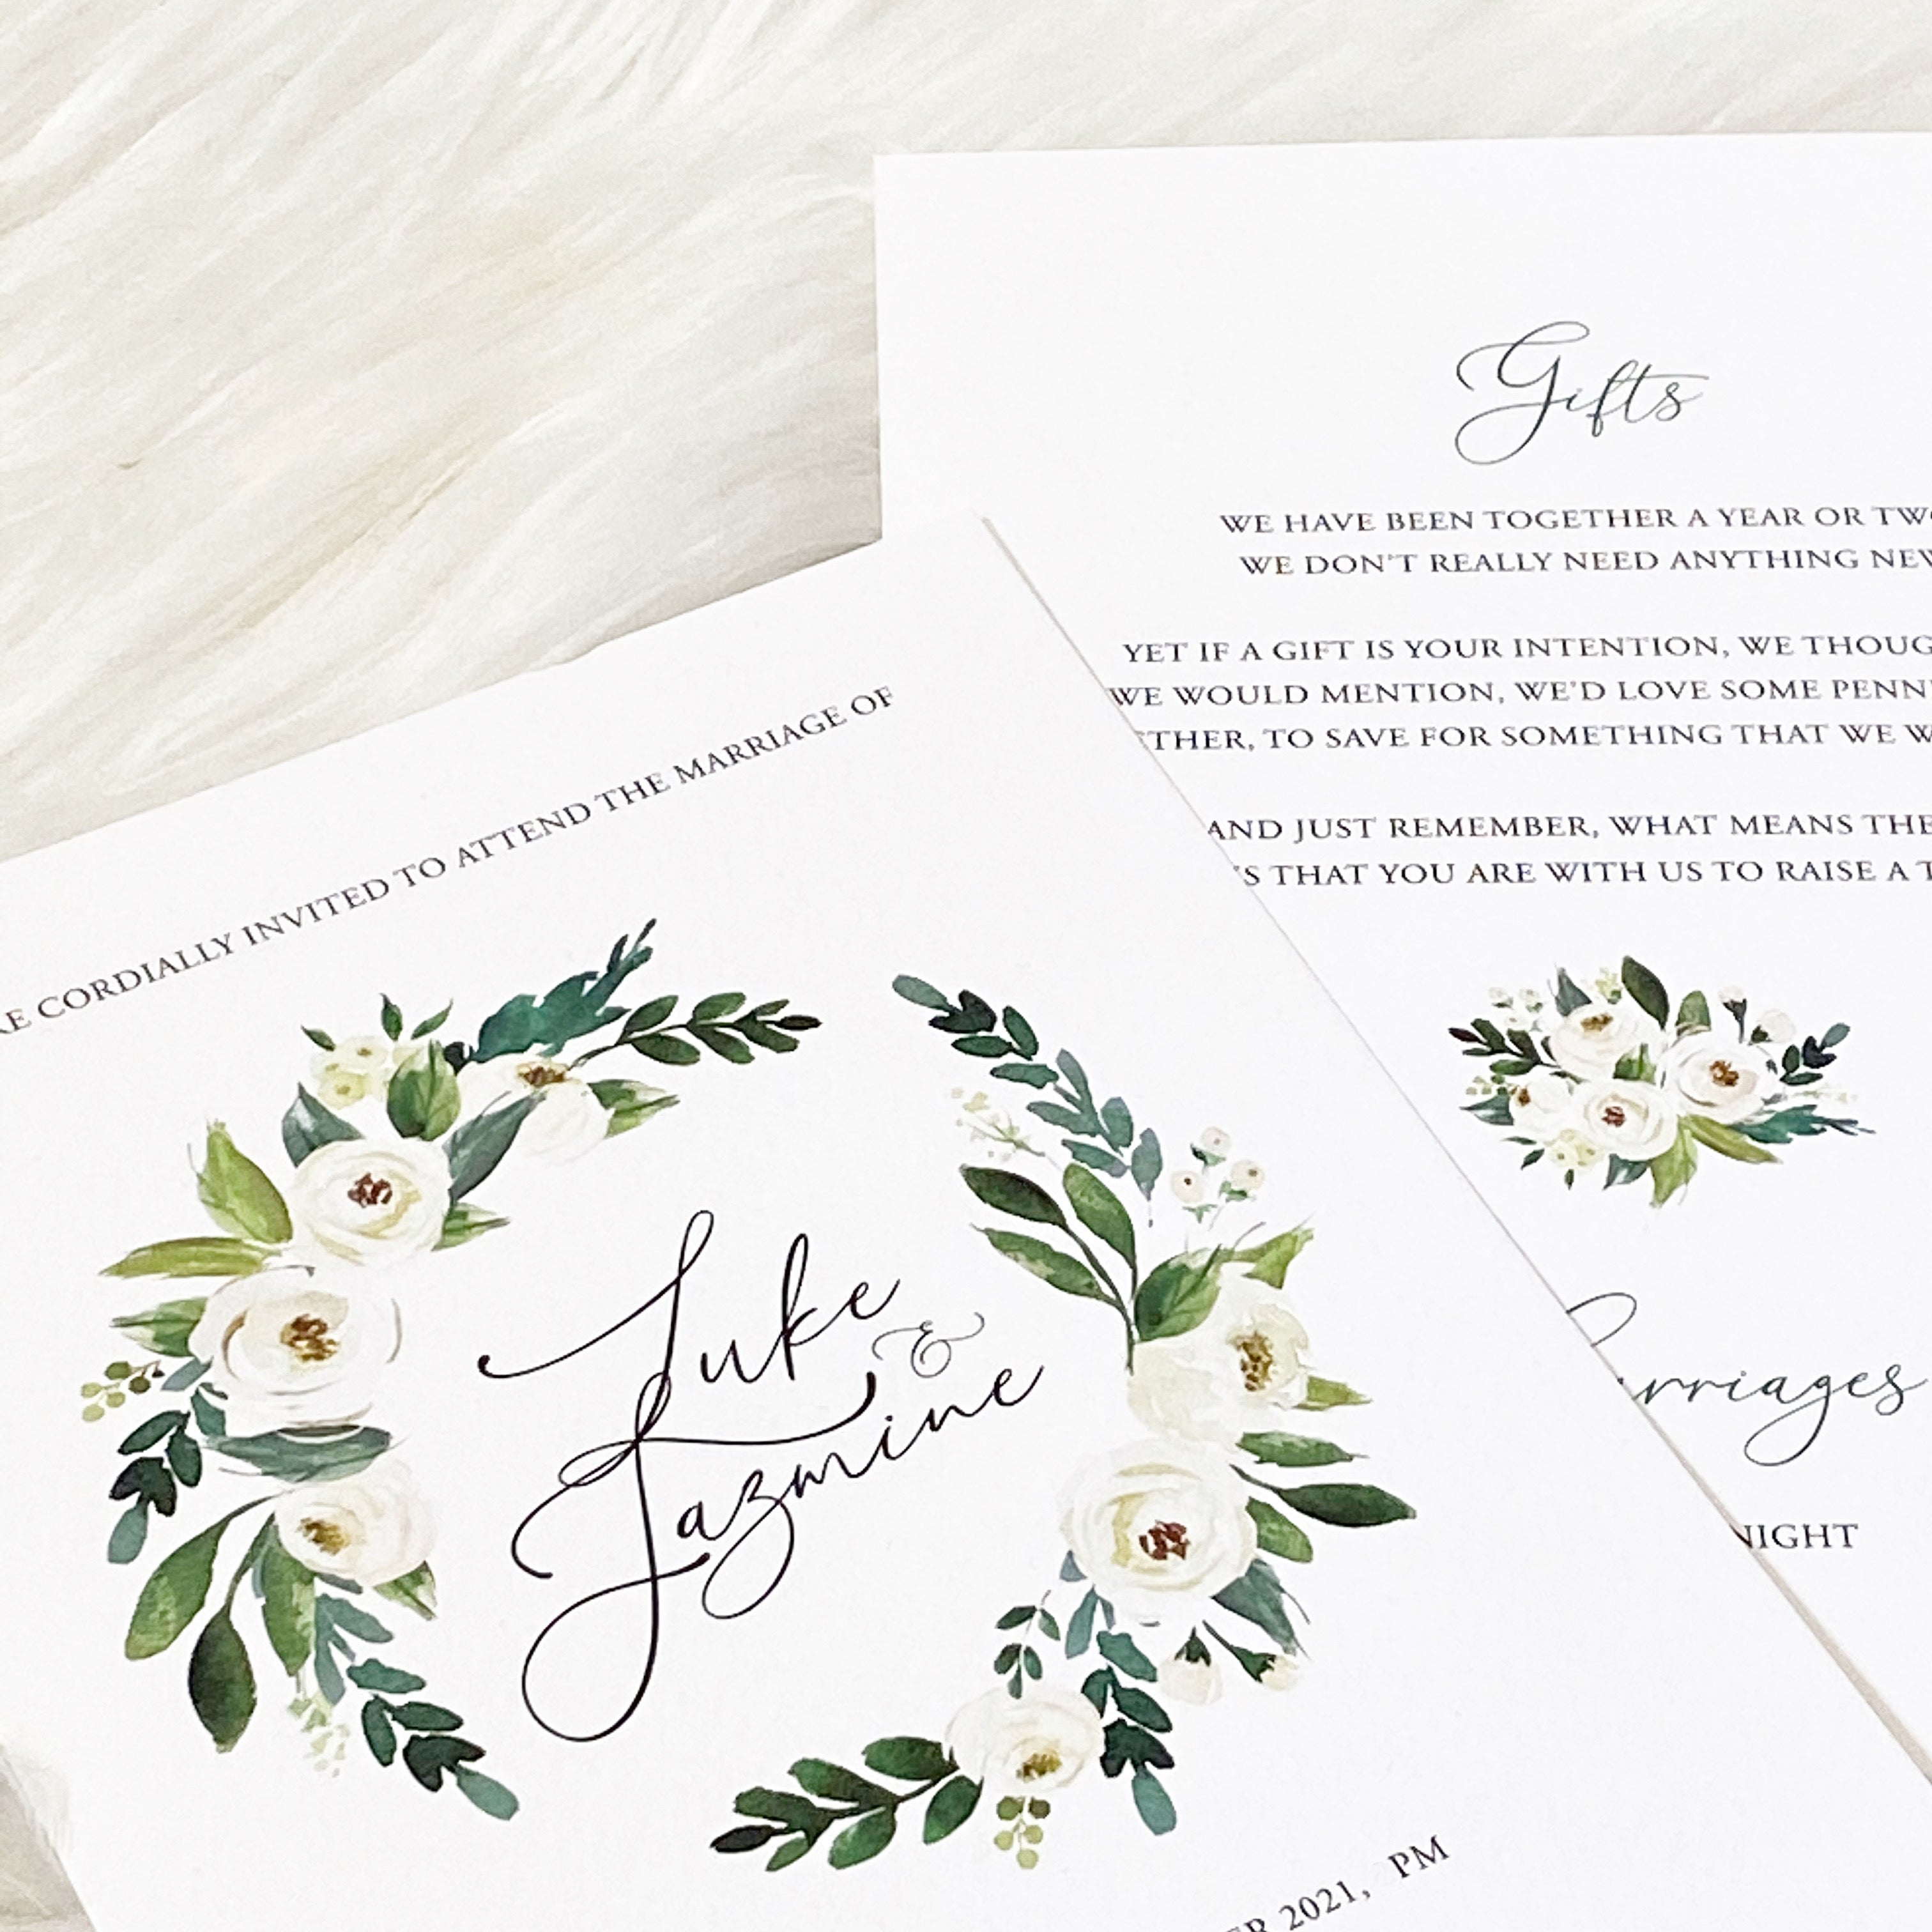 Green & White foliage and floral wreath on white textured A5 paper stock invitations